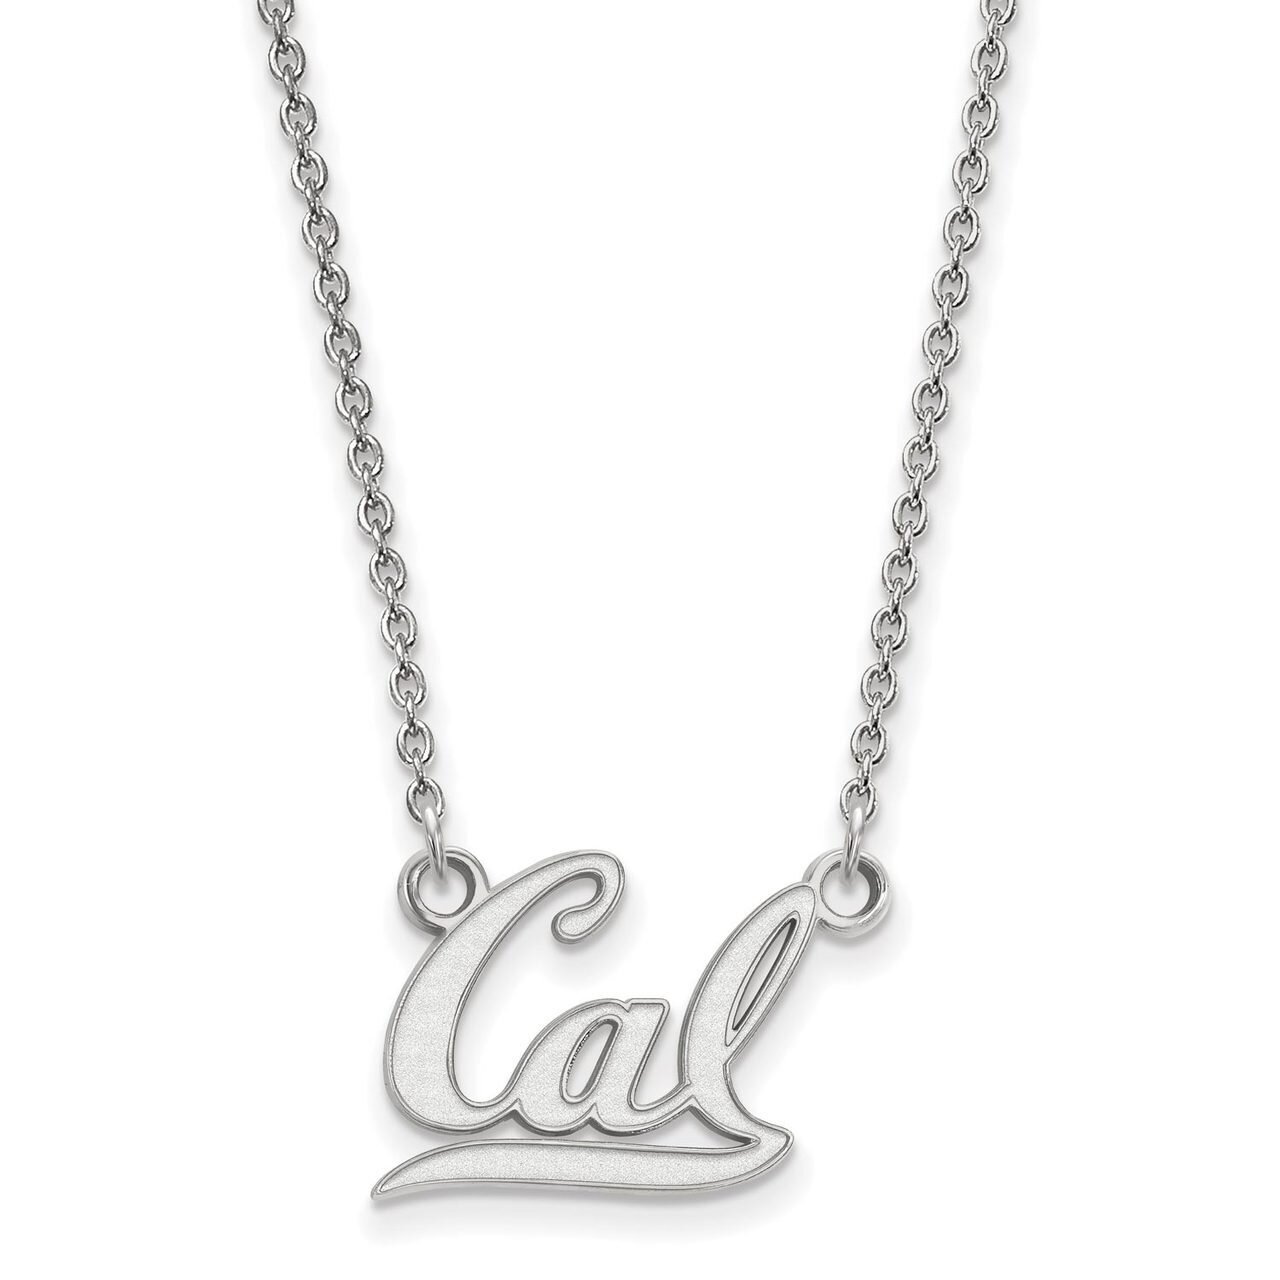 University of California Berkeley Small Pendant with Chain Necklace 10k White Gold 1W011UCB-18